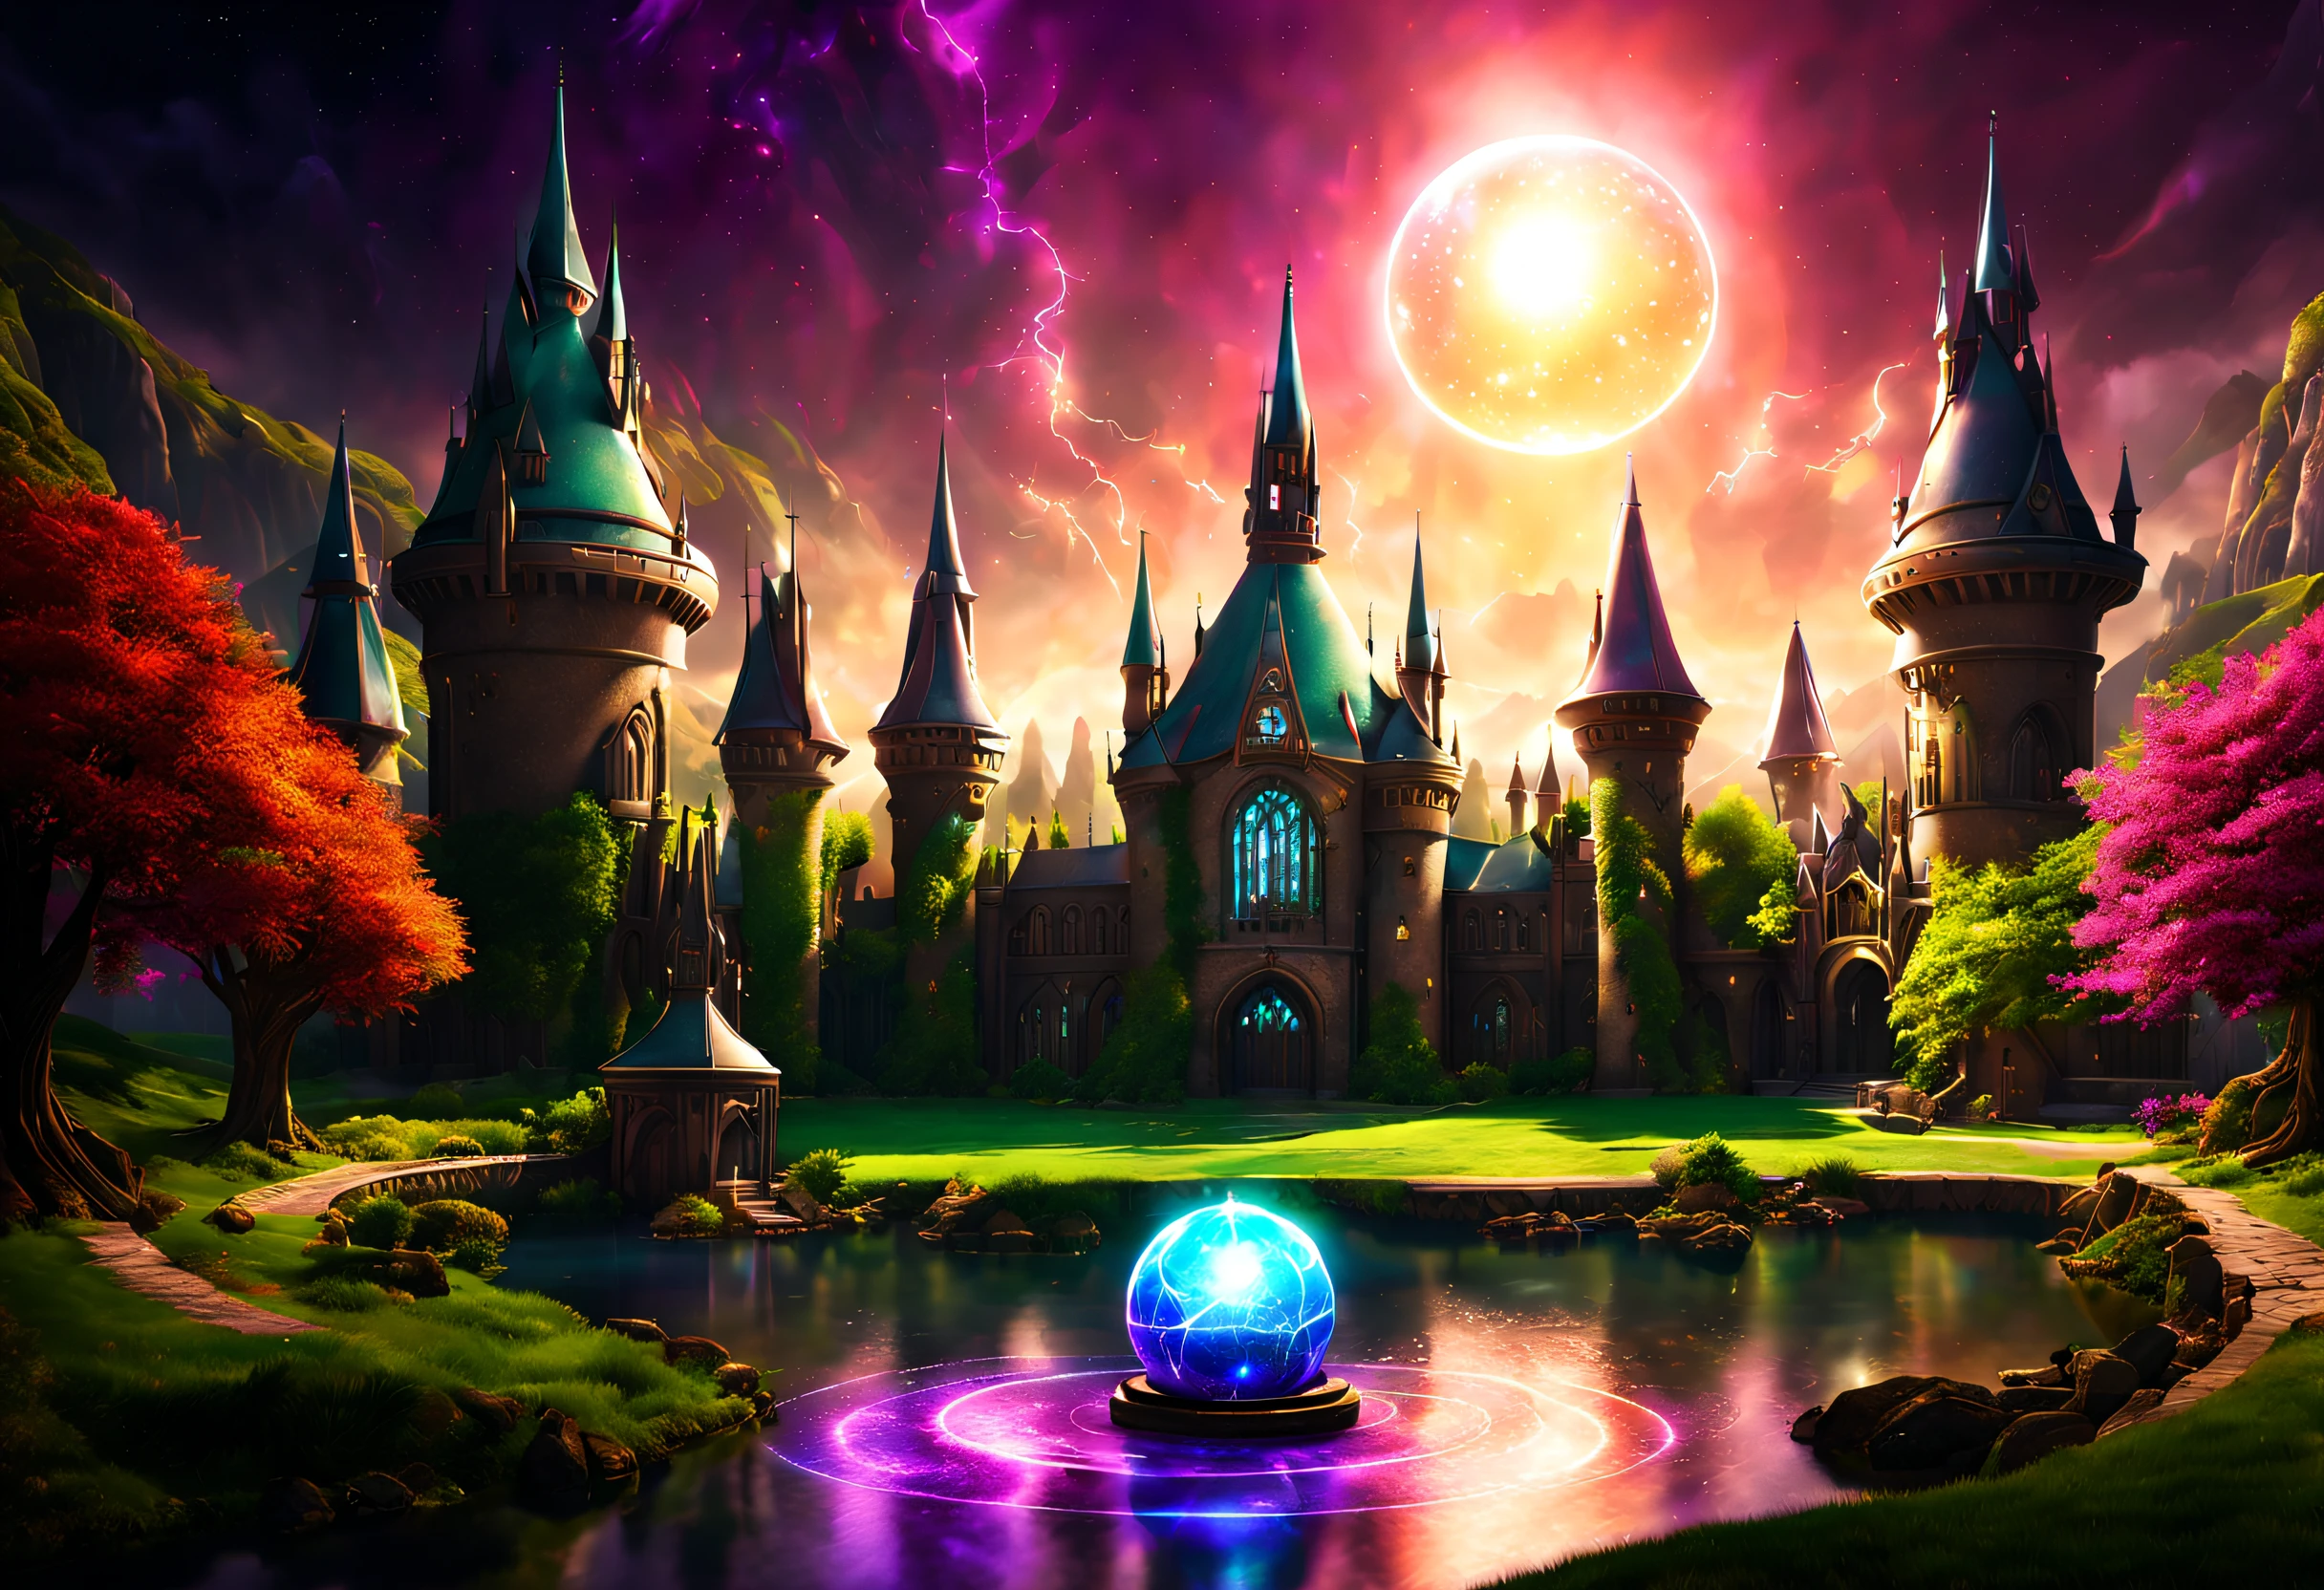 A magical academy protected by powerful spells, (best quality,4k,8k,highres,masterpiece:1.2),A large magic school with towers and domes, surrounded by a green field and a lake. The school is enveloped in a magical aura of colors that protects it from intruders. (It is inside a large magical orb:1.2).